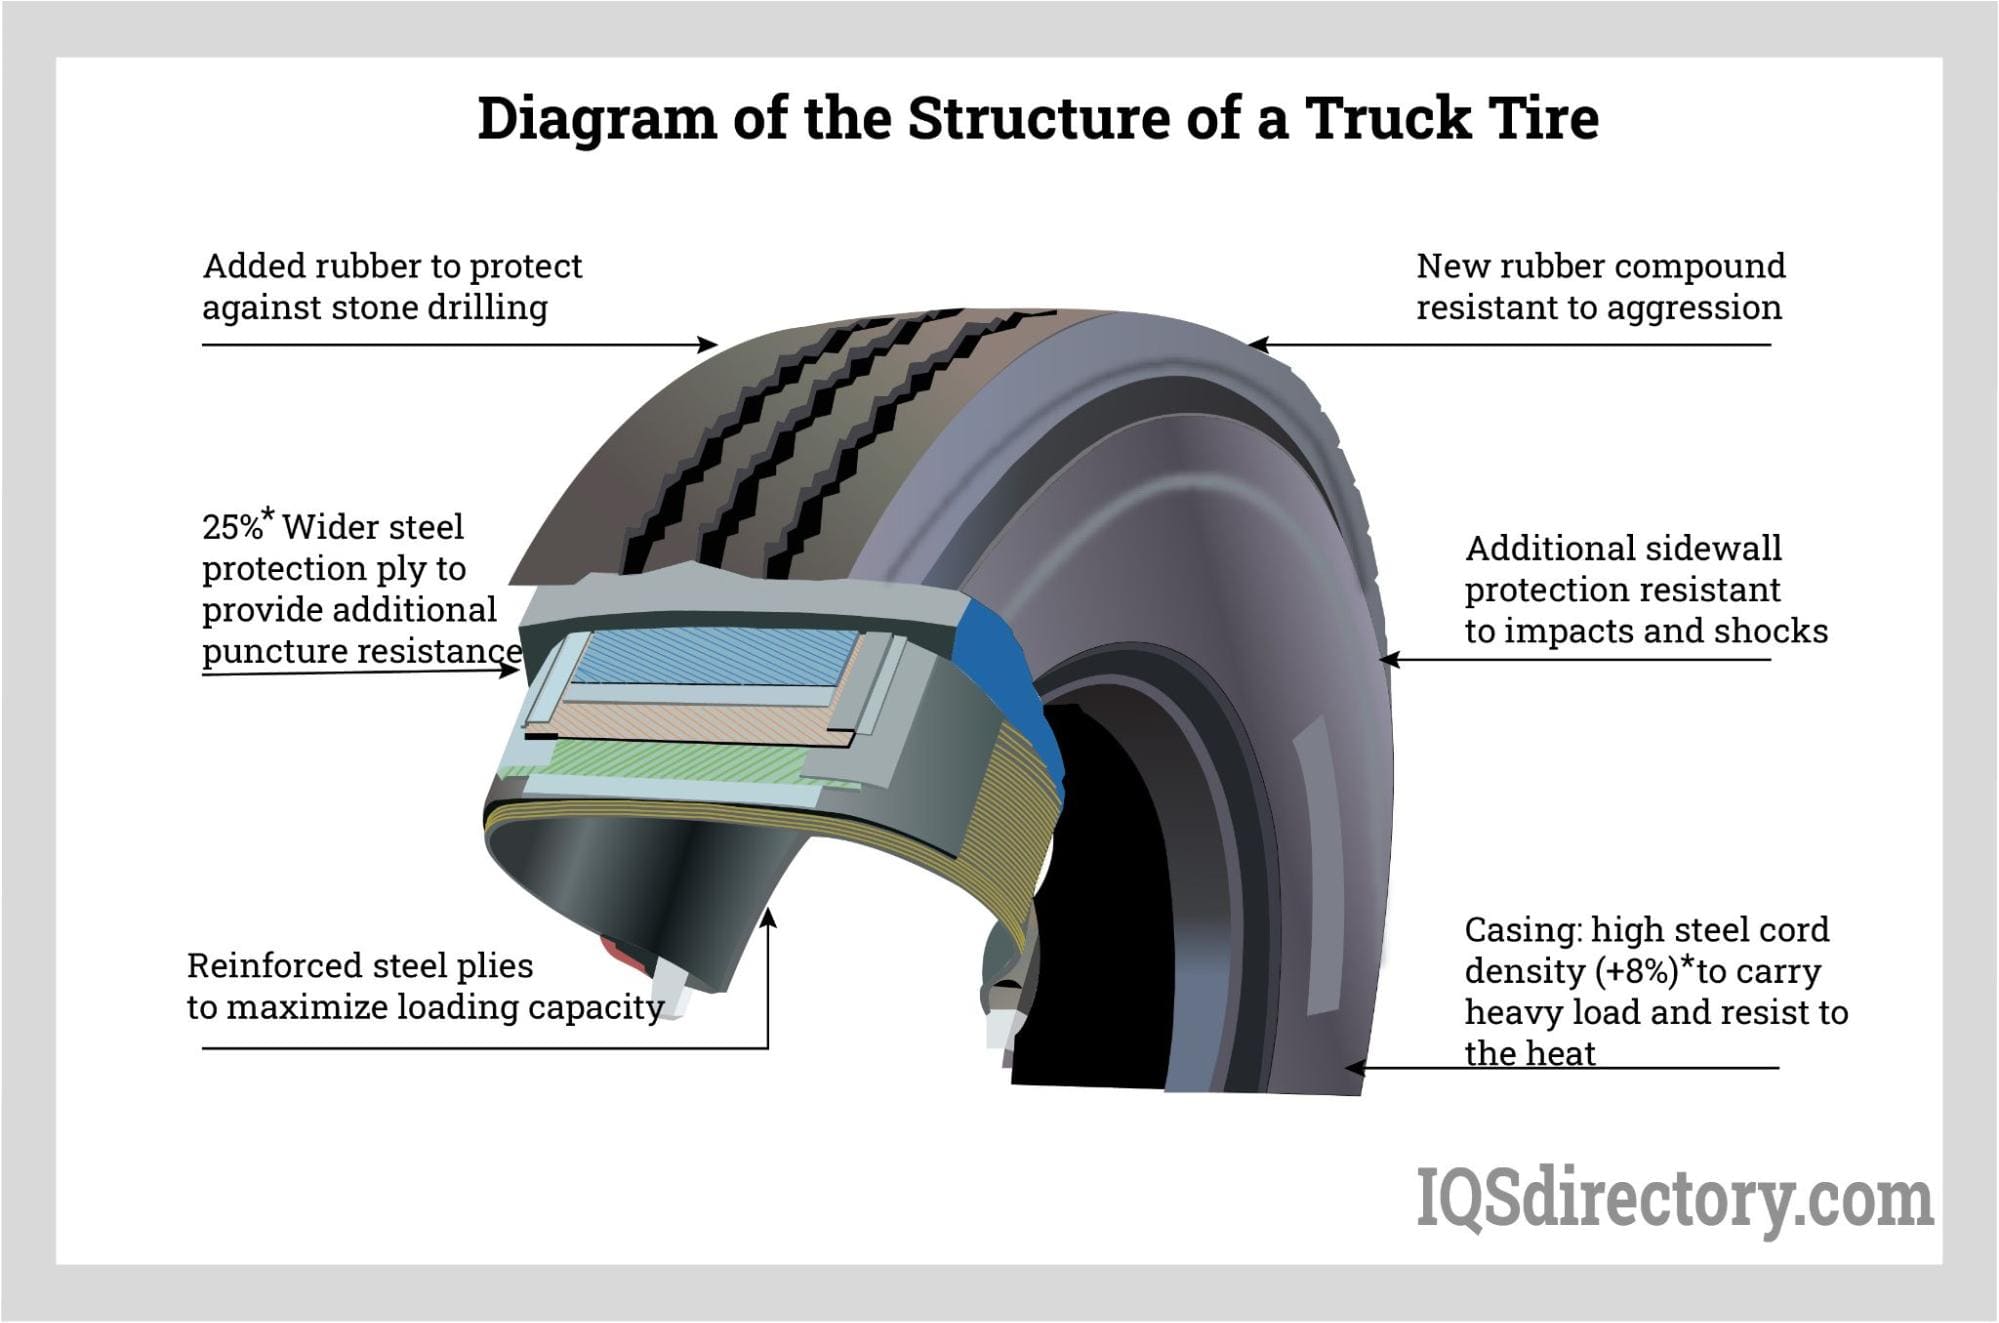 Diagram of the Structure of a Truck Tire